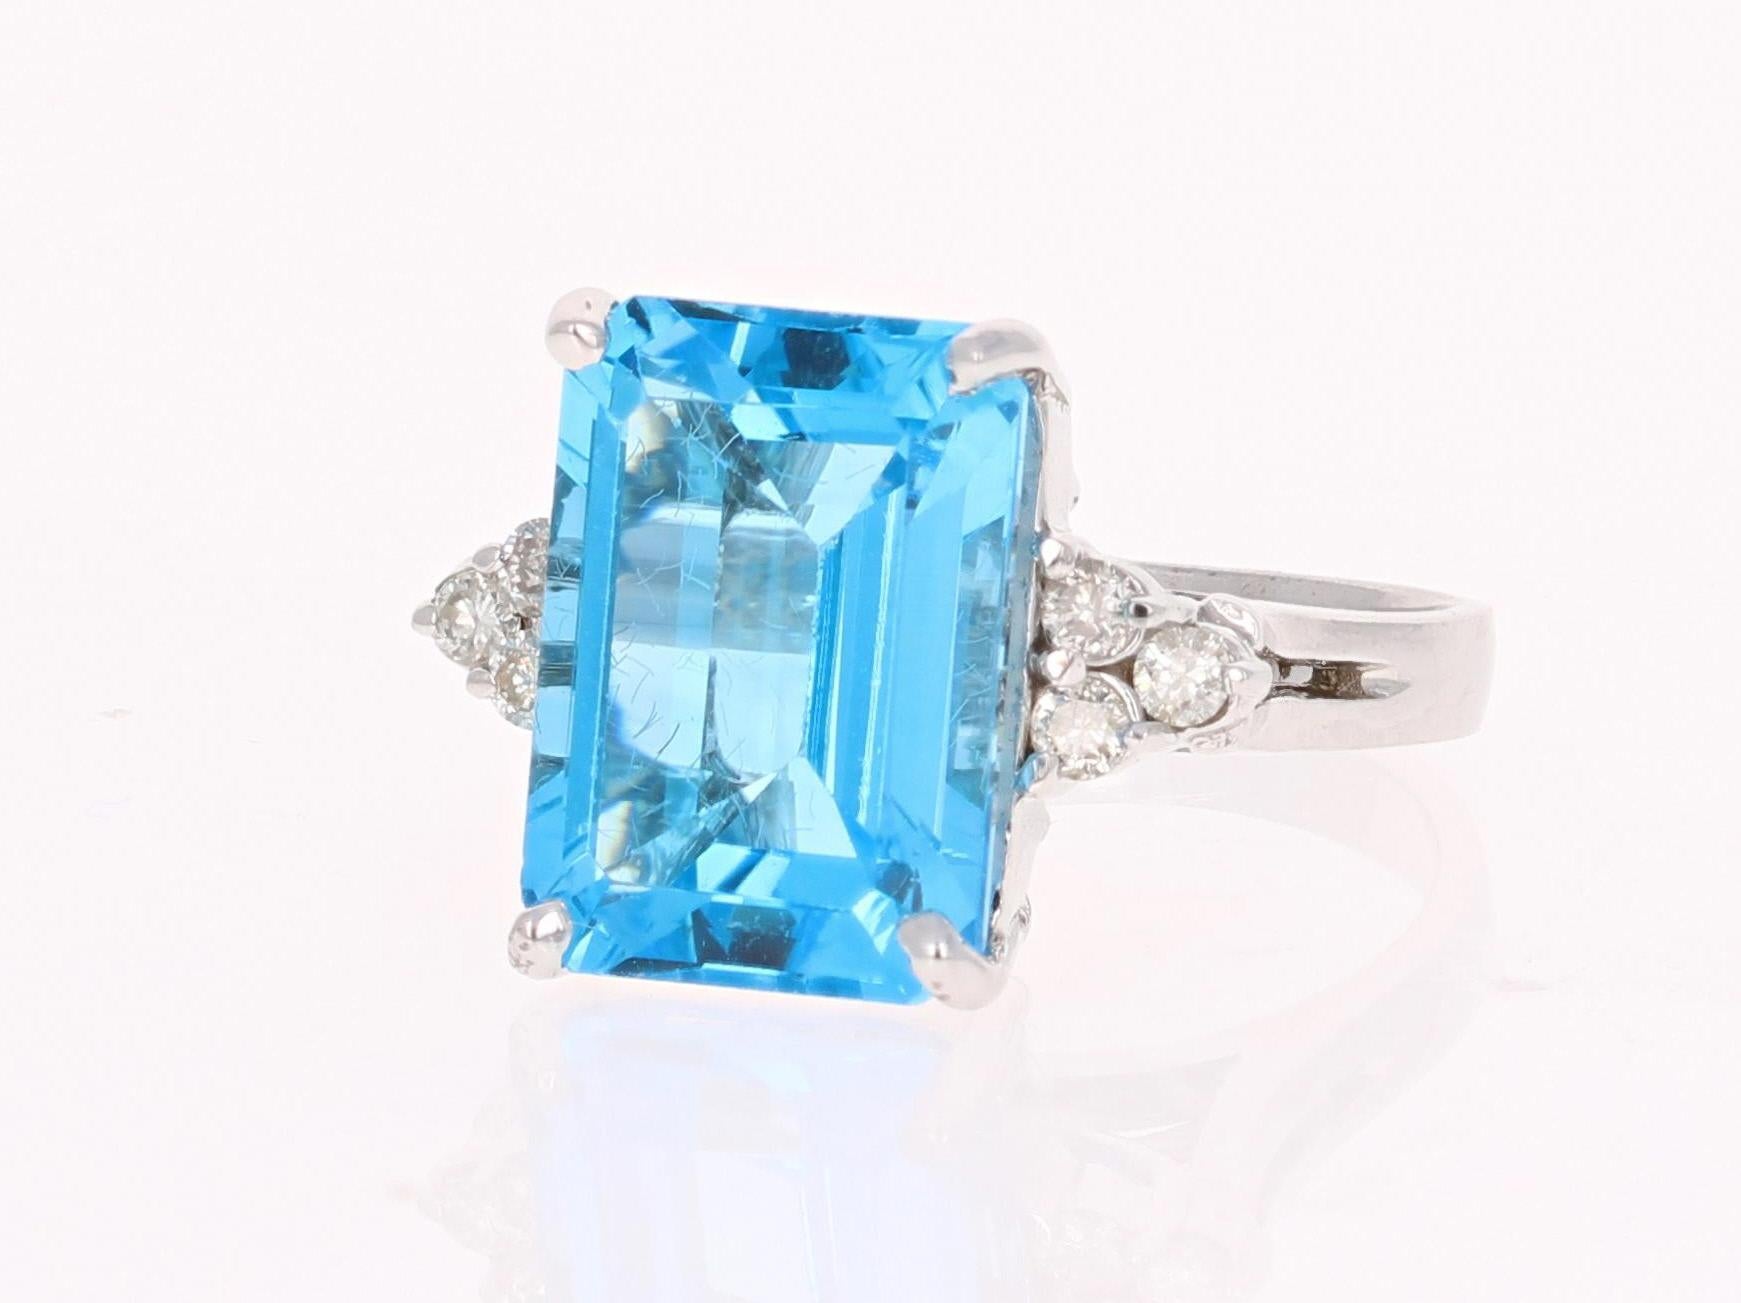 This beautiful Emerald cut Blue Topaz and Diamond ring has a stunningly large Blue Topaz that weighs 8.77 Carats. It is surrounded by 6 Round Cut Diamonds that weigh 0.23 Carats. The total carat weight of the ring is 9.00 Carats. 
The setting is